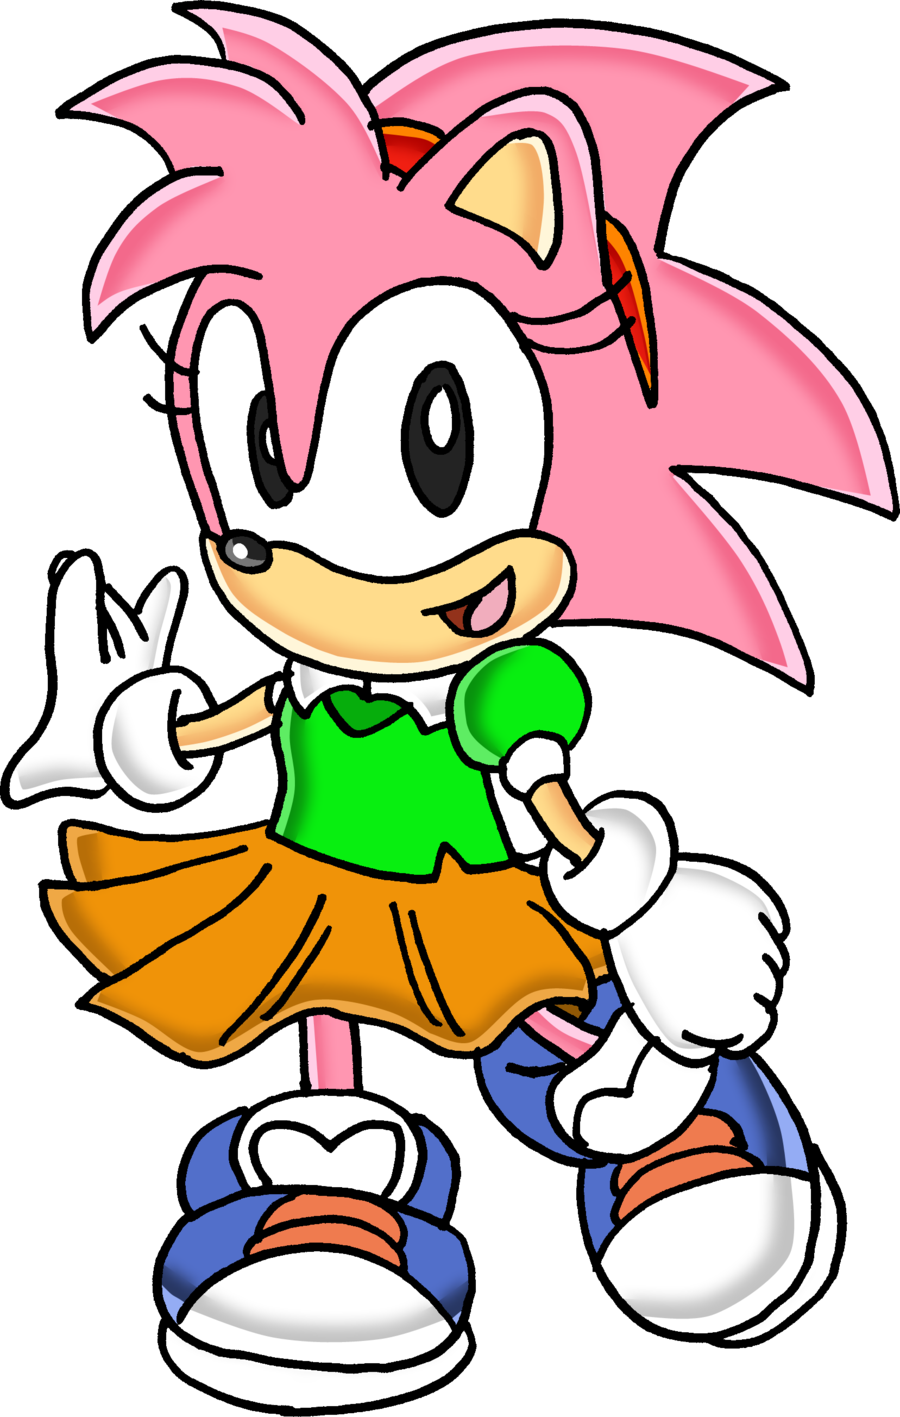 Classic Amy Rose By Tails19950-d4dfjki - Classic Amy From Sonic (900x1417)